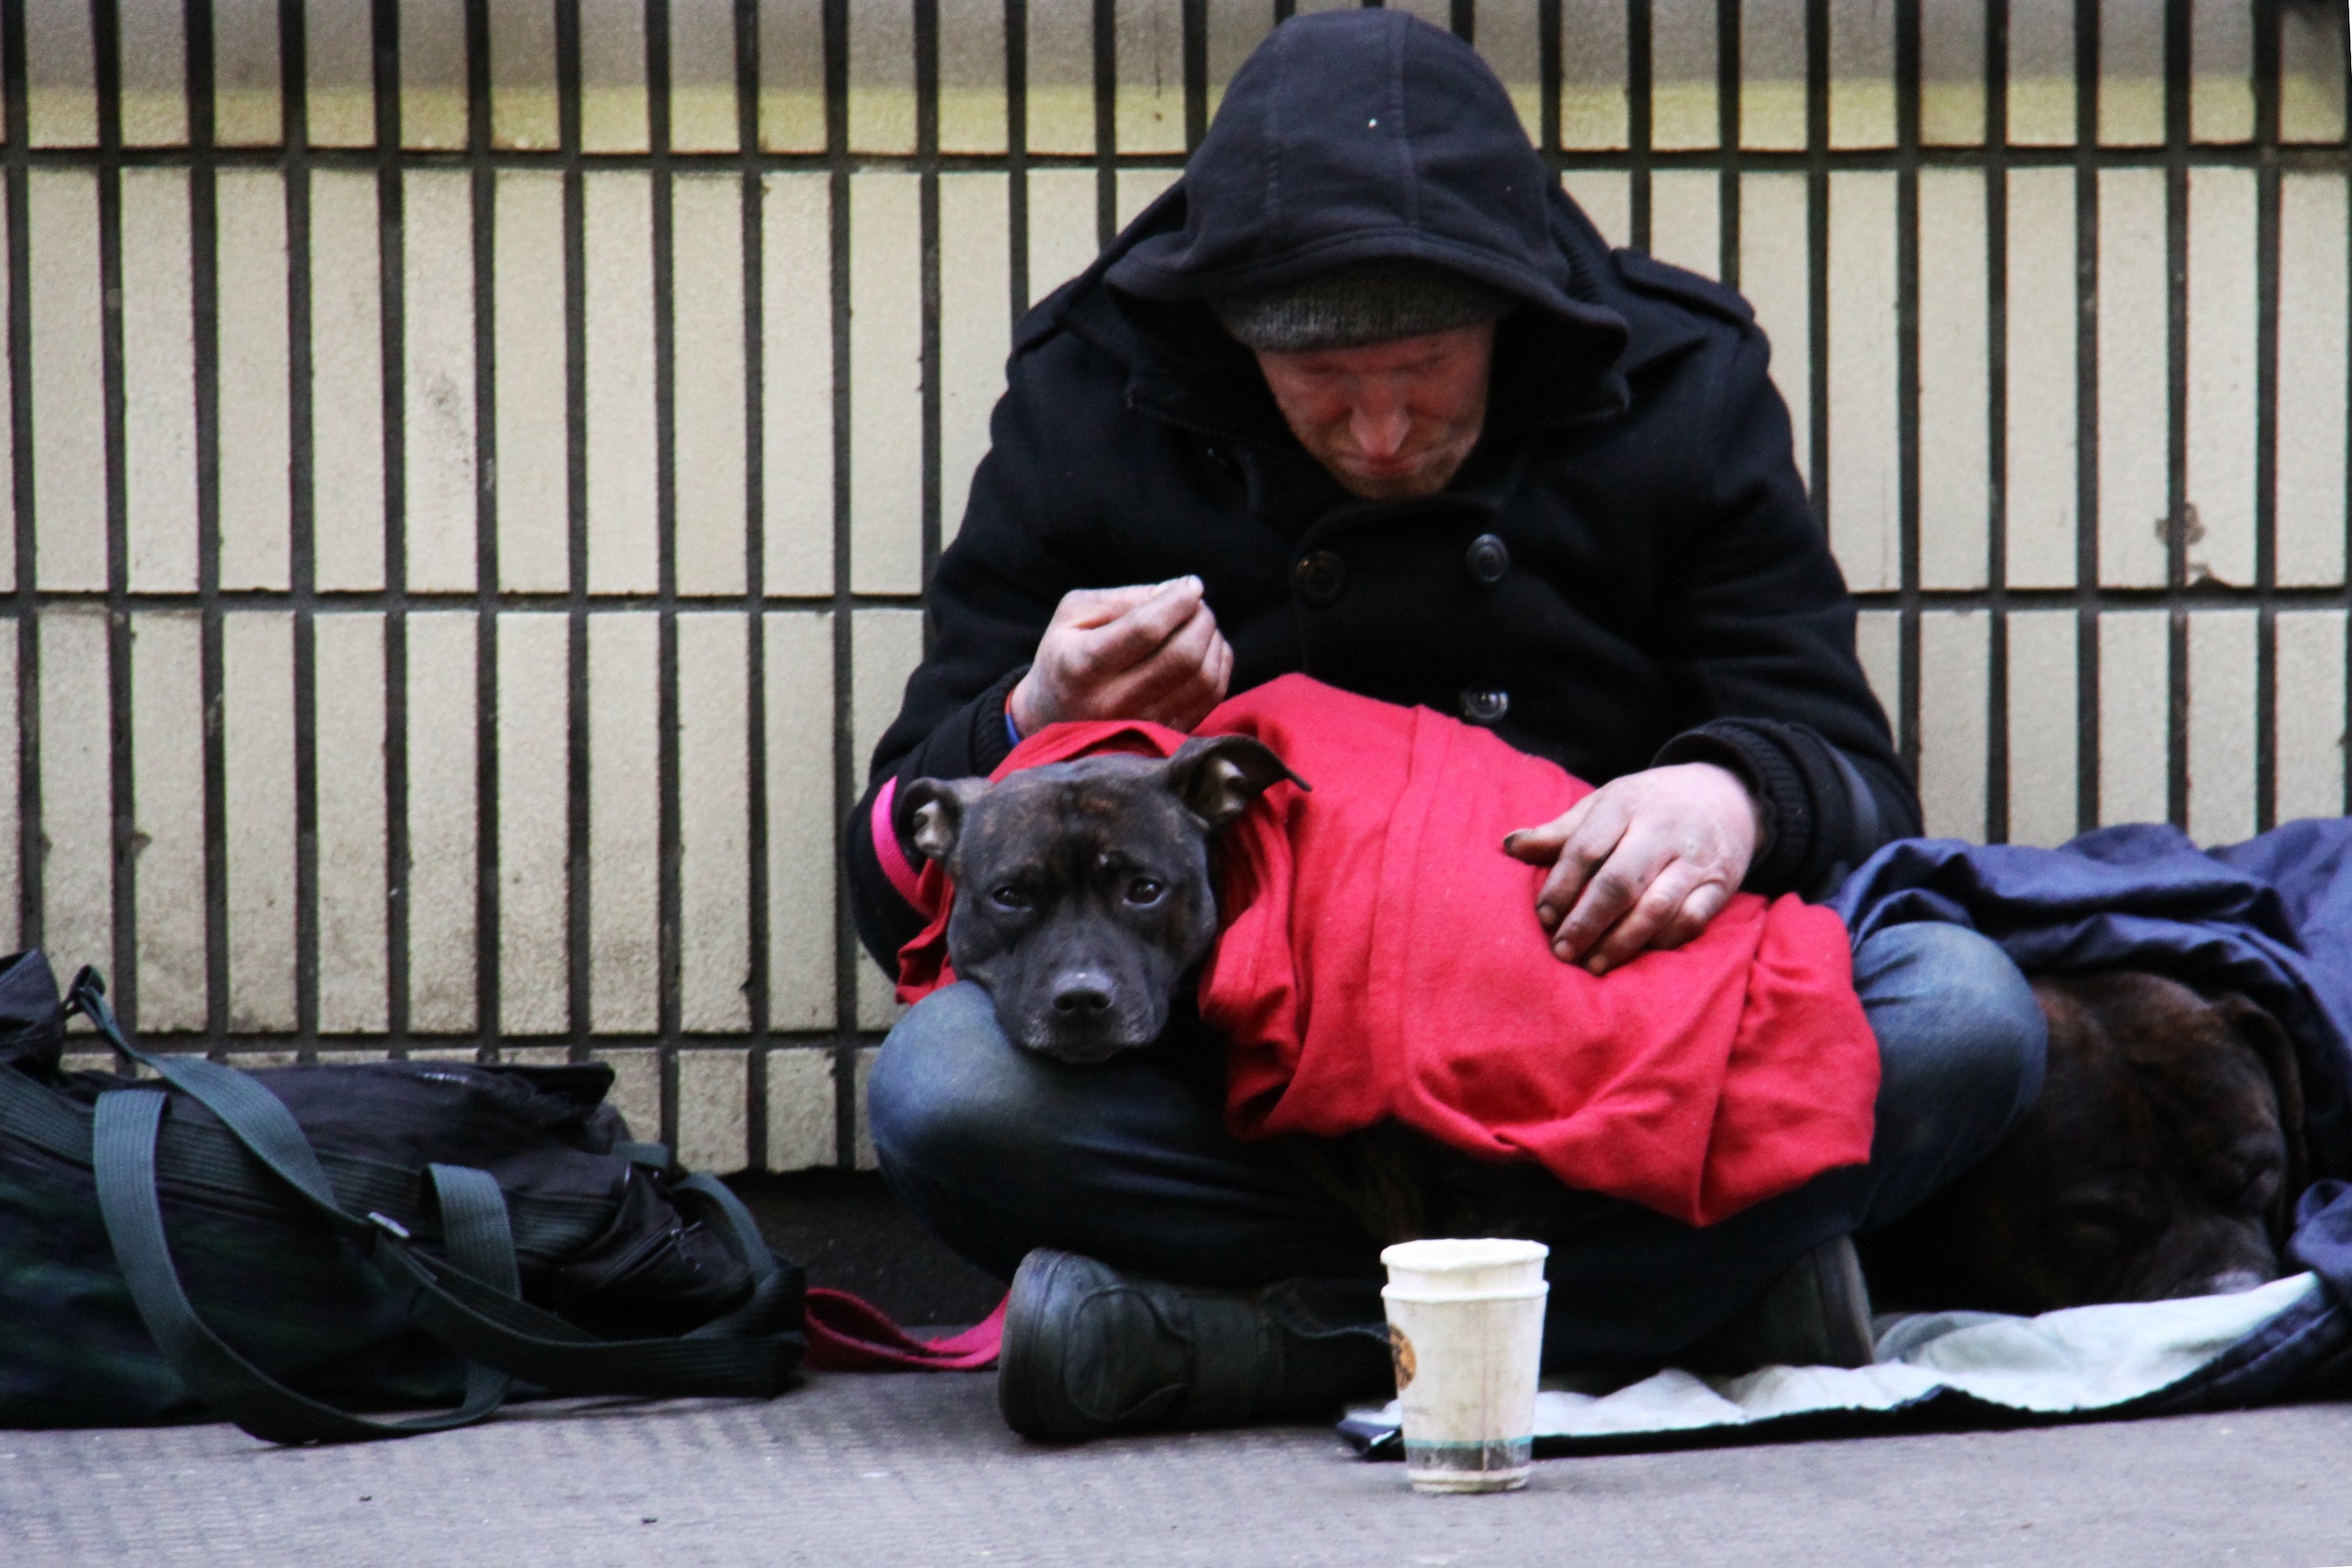 Featured Image for “Tackling homelessness, the Common Good way”